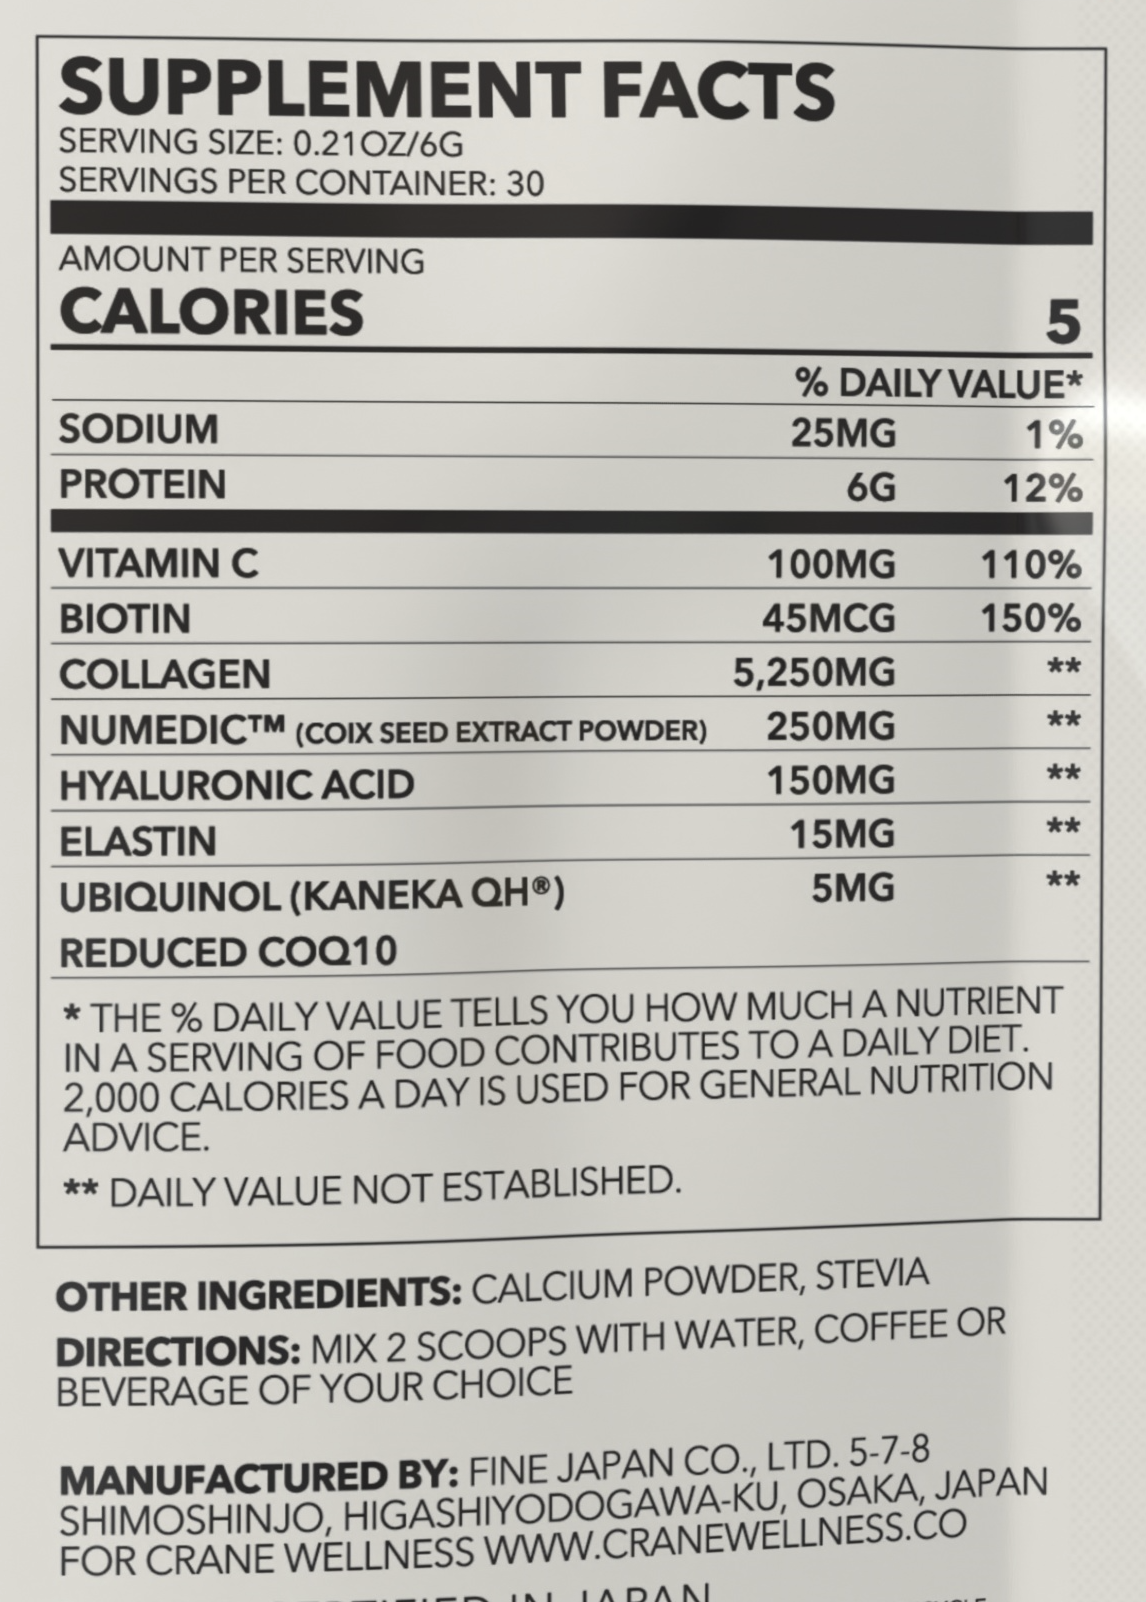 Supplement facts for  Radiant Renew Collagen Hydration Complex powder showing other ingredients (calcium powder, stevia), directions (mix 6g with water or any beverage). Manufactured in Japan by parent company Fine Japan.